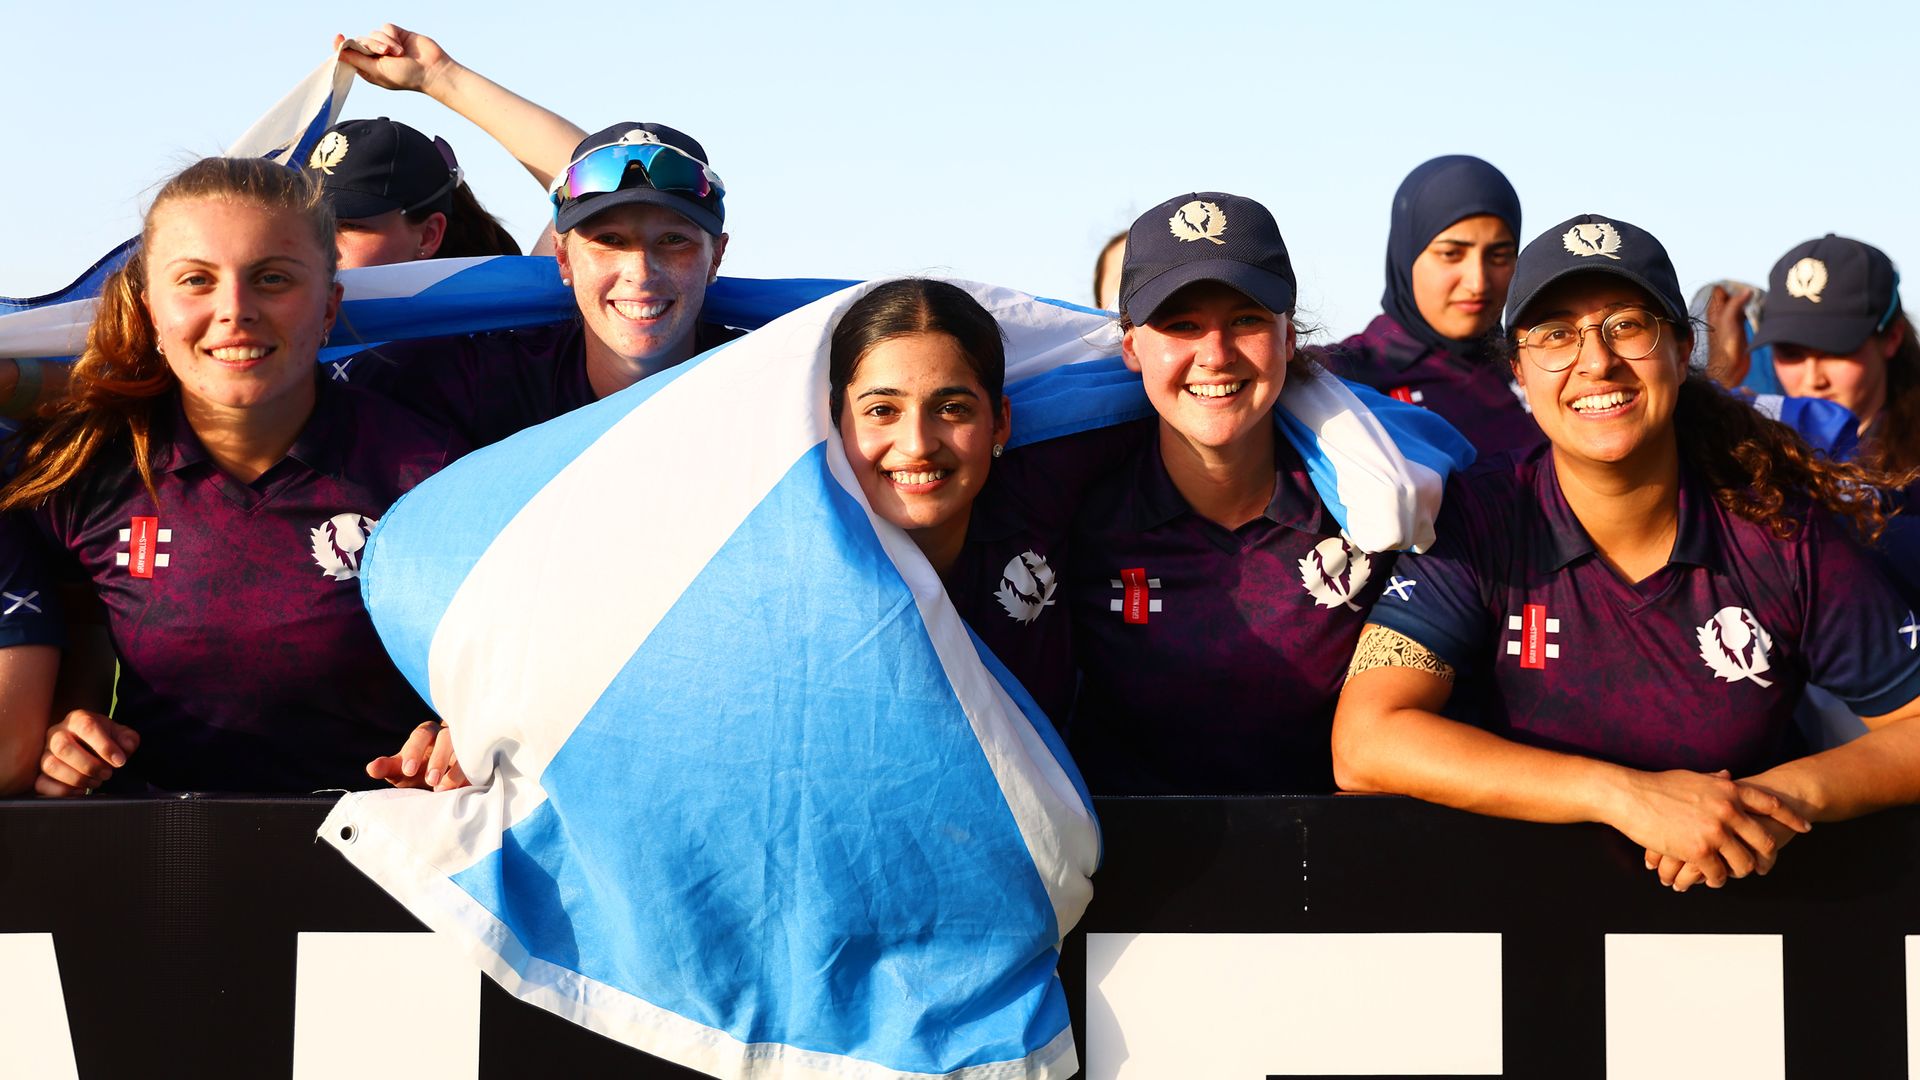 Scotland into first Women's T20 World Cup after eliminating Ireland